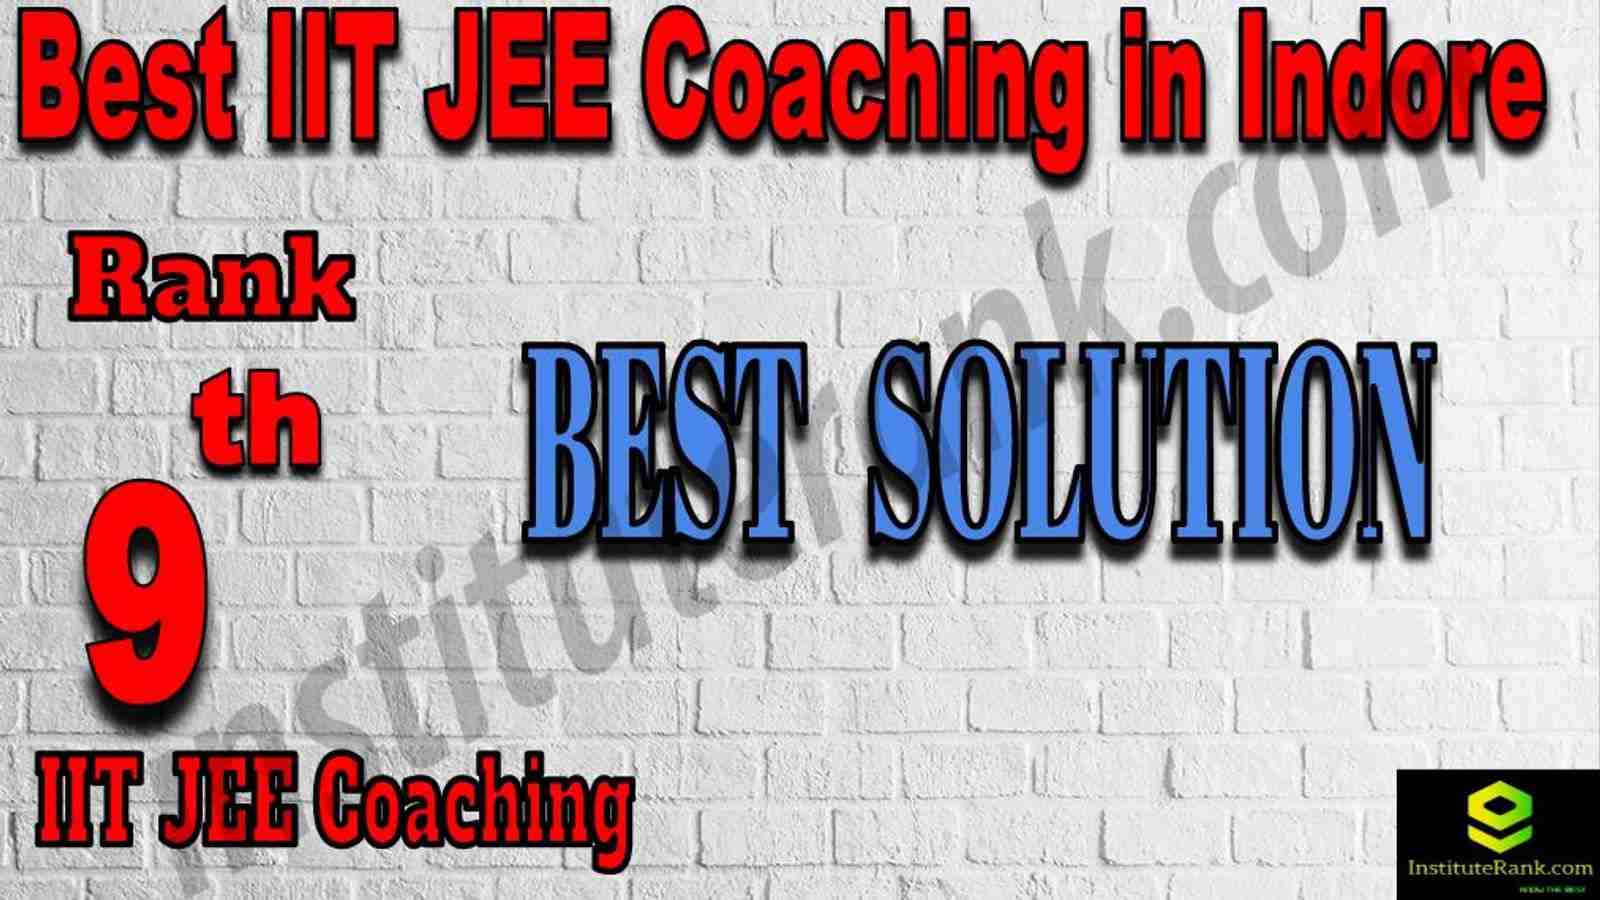 9th Best IIT JEE Coaching in Indore